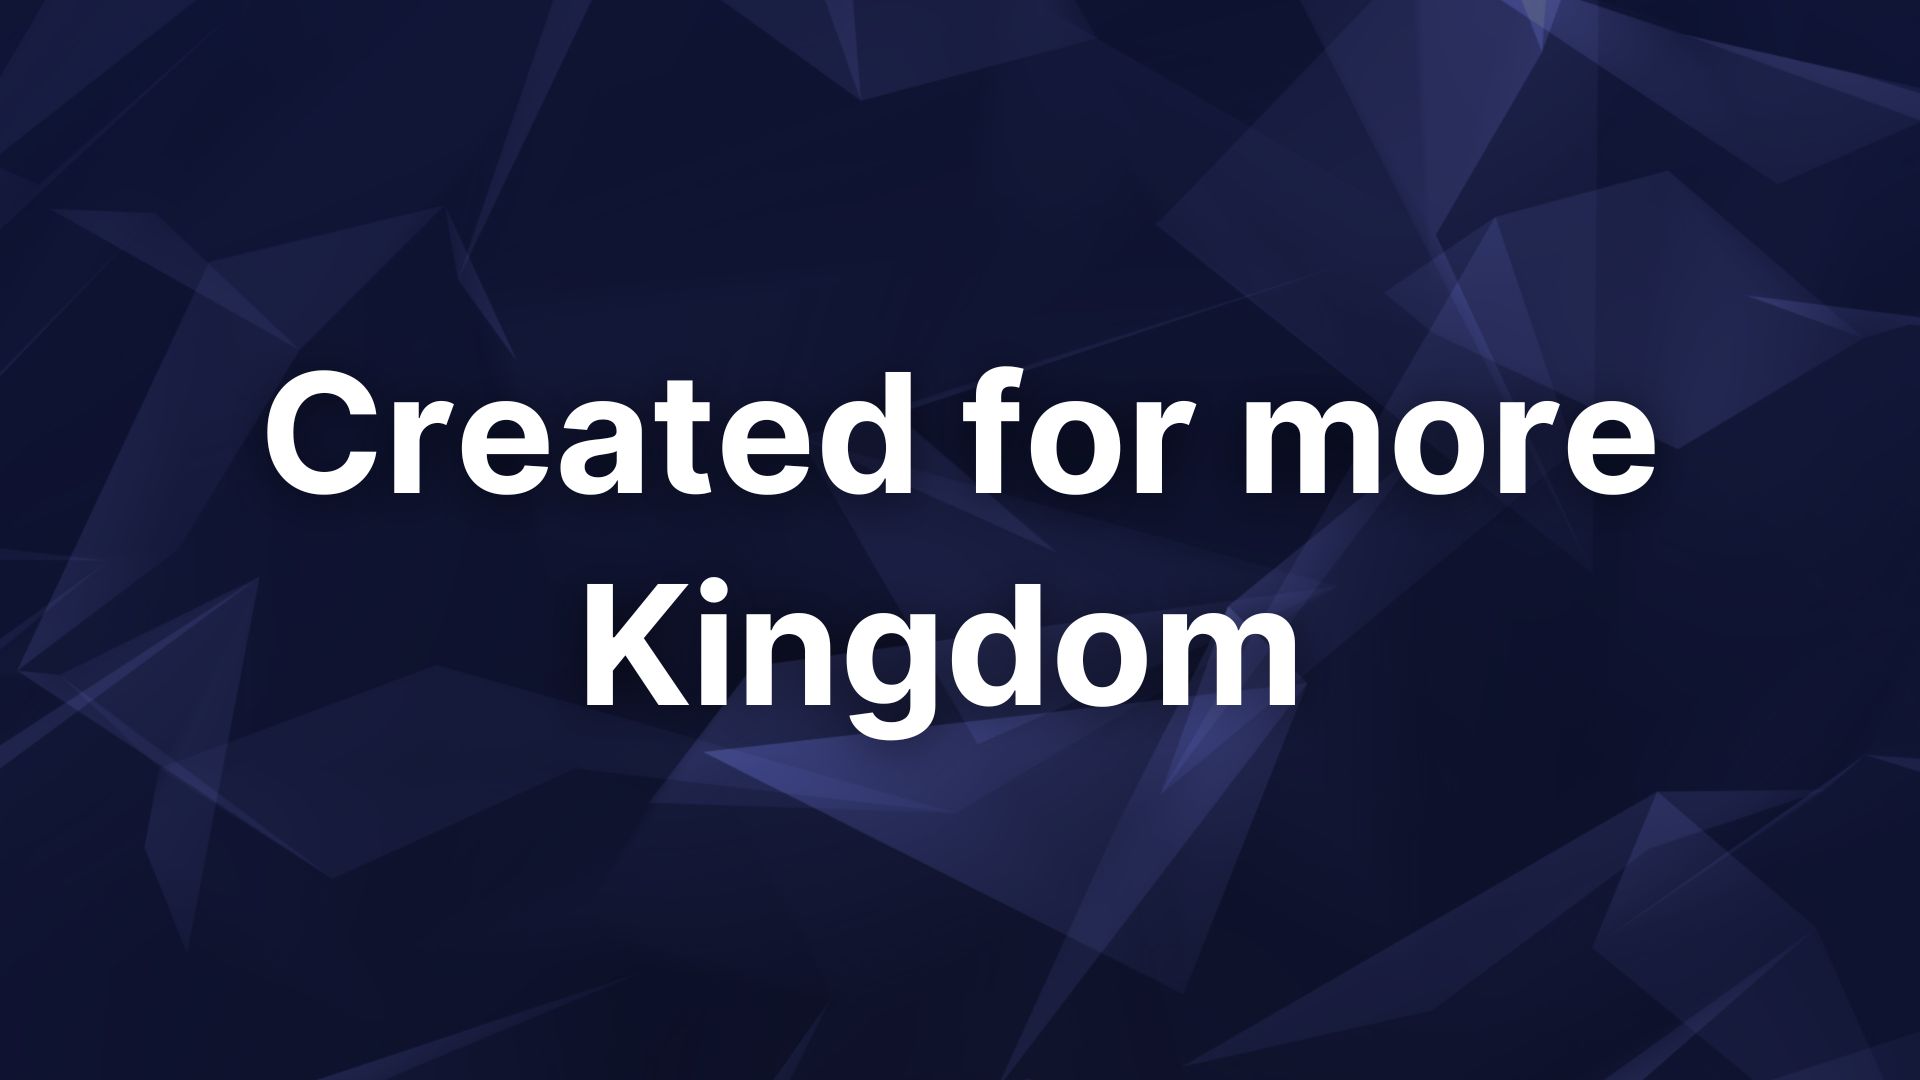 Created for more Kingdom